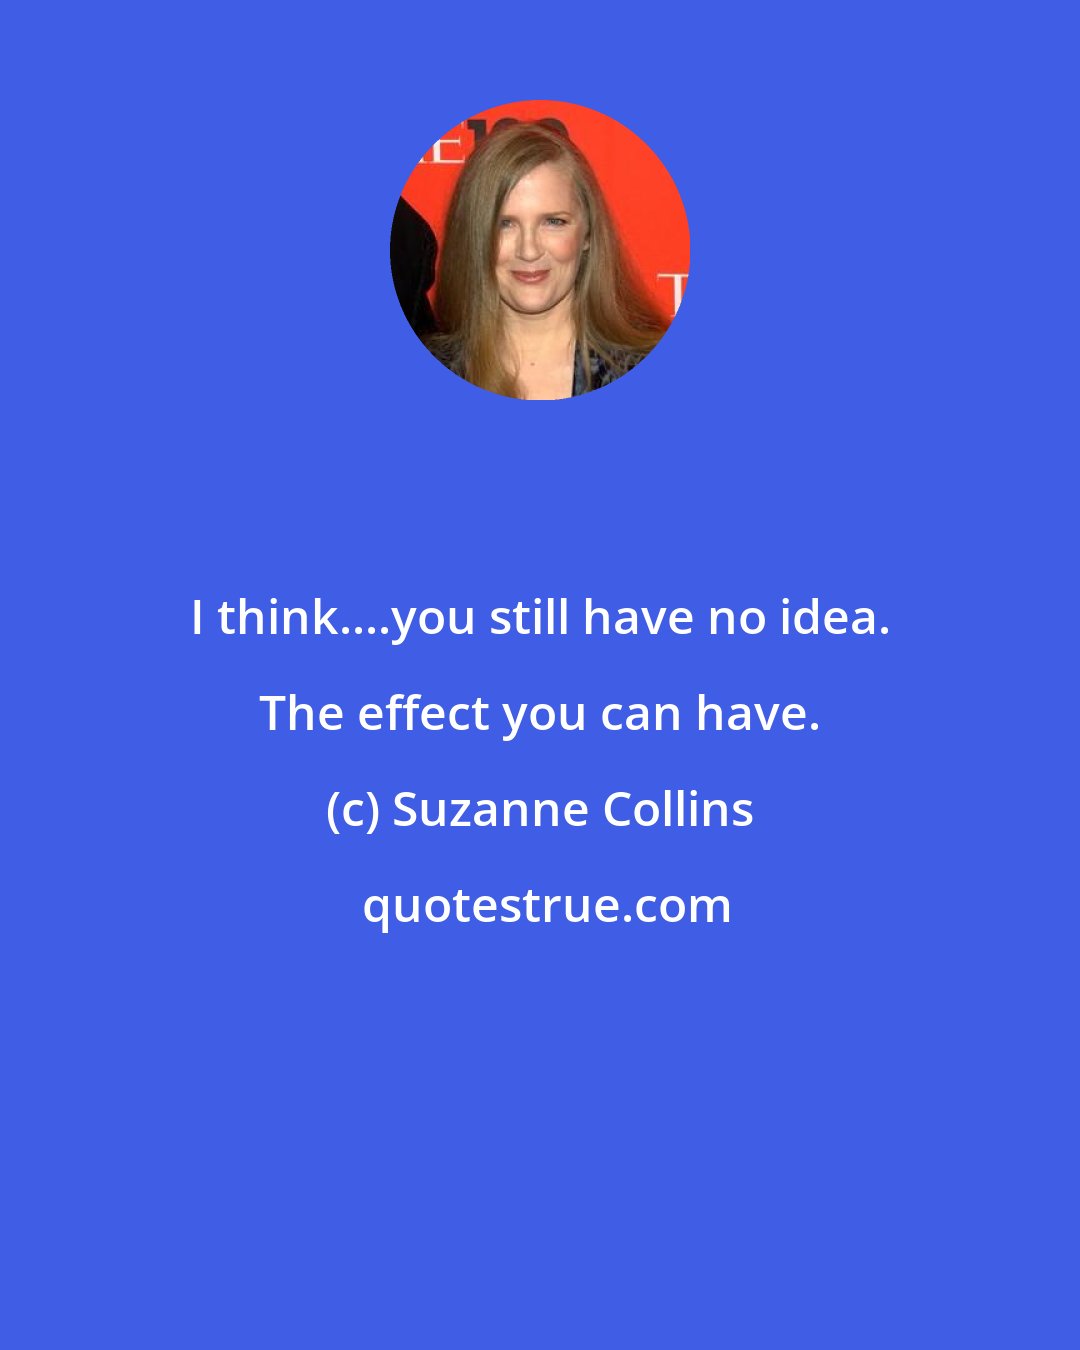 Suzanne Collins: I think....you still have no idea. The effect you can have.